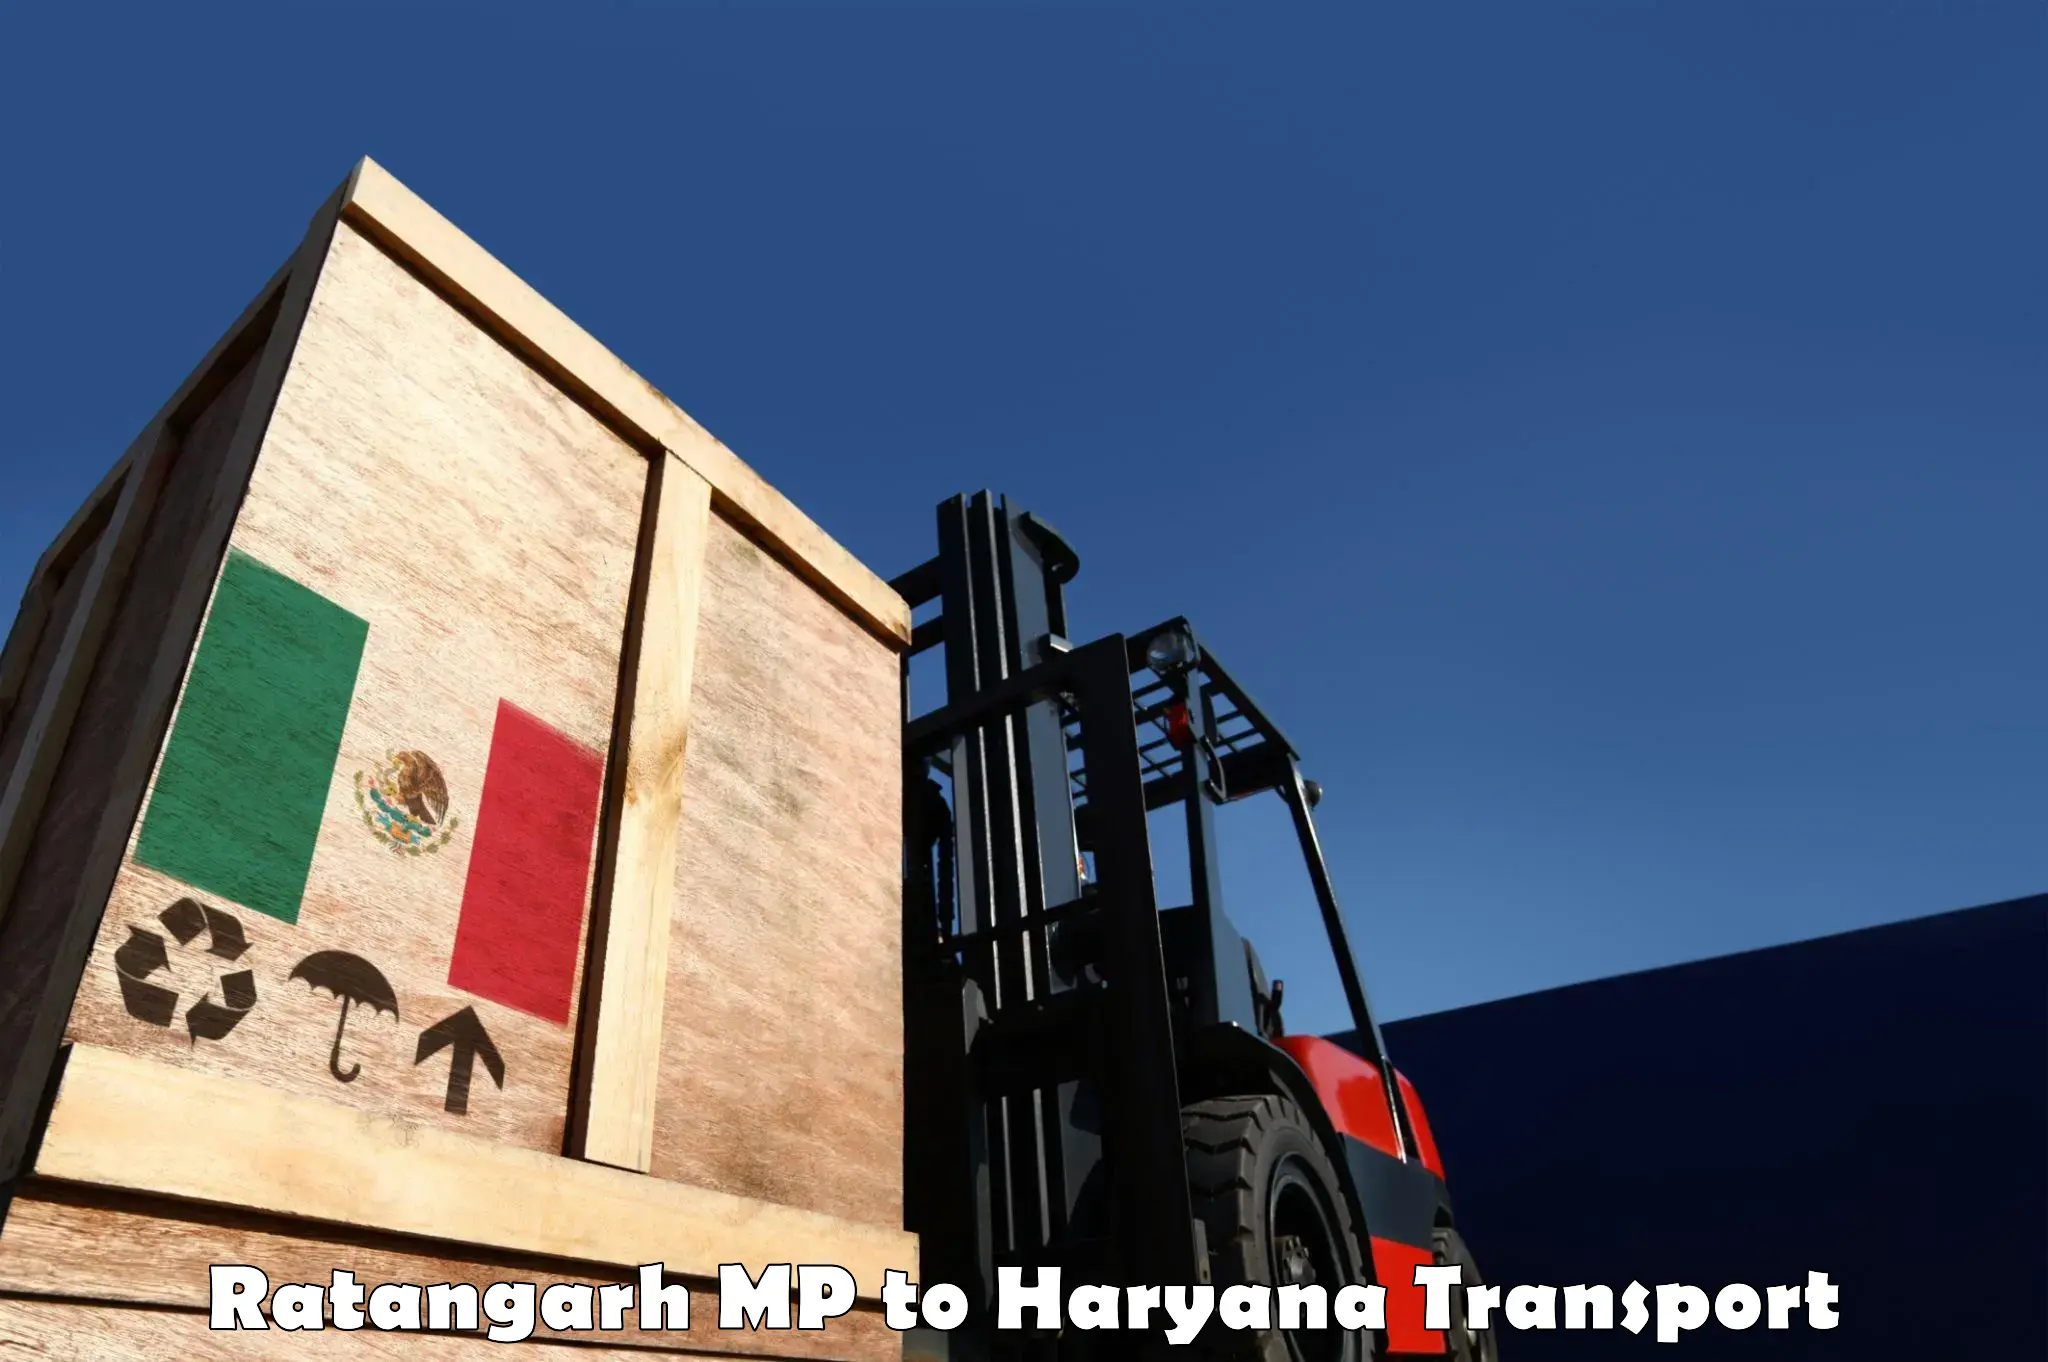 Part load transport service in India Ratangarh MP to NCR Haryana